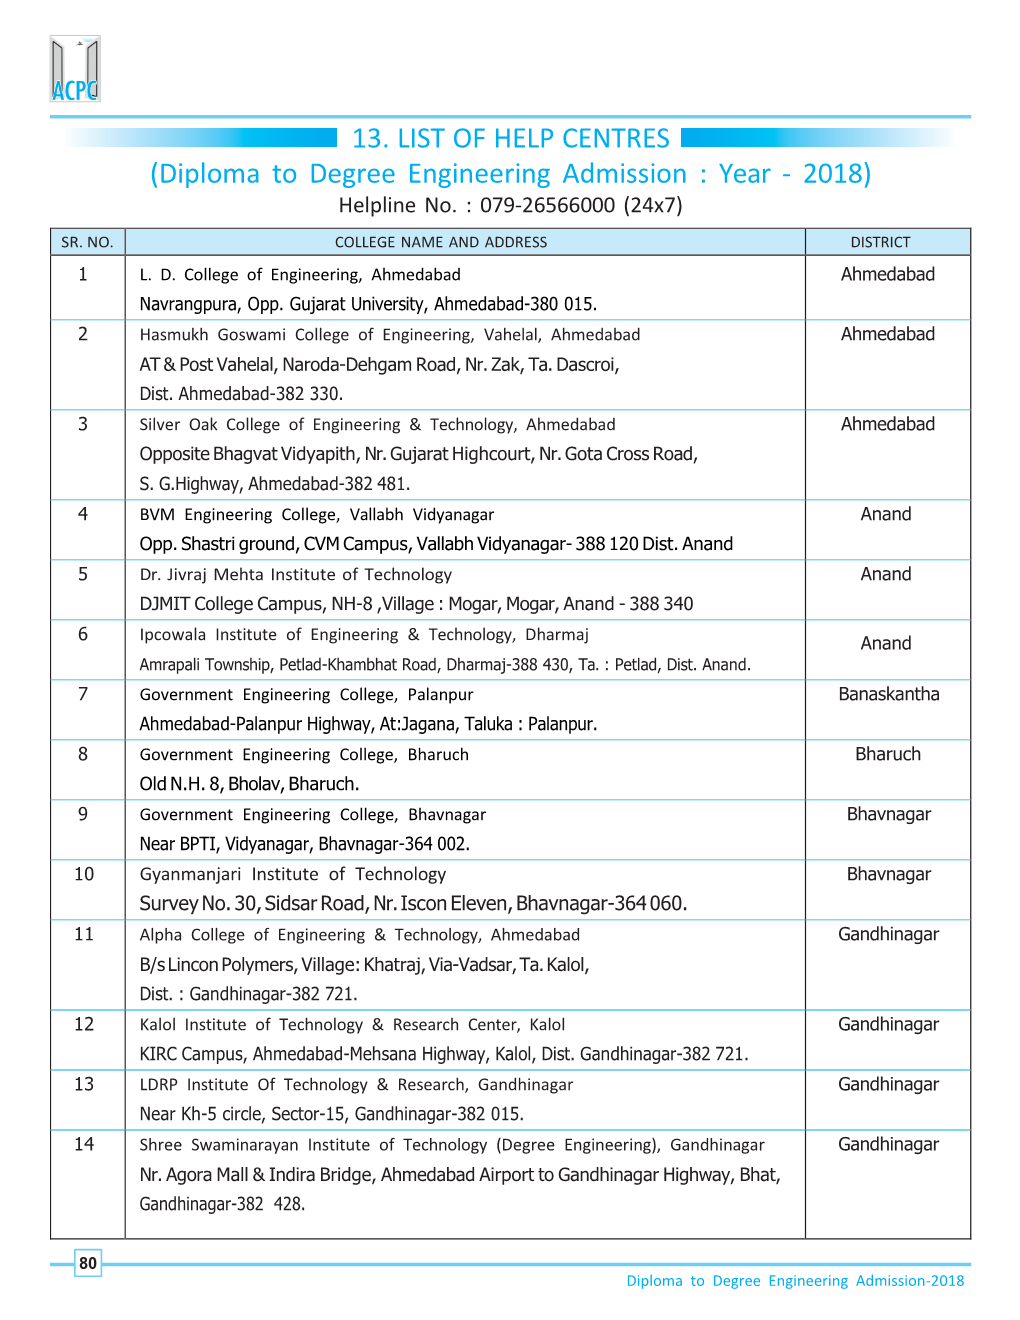 13. LIST of HELP CENTRES (Diploma to Degree Engineering Admission : Year - 2018) Helpline No